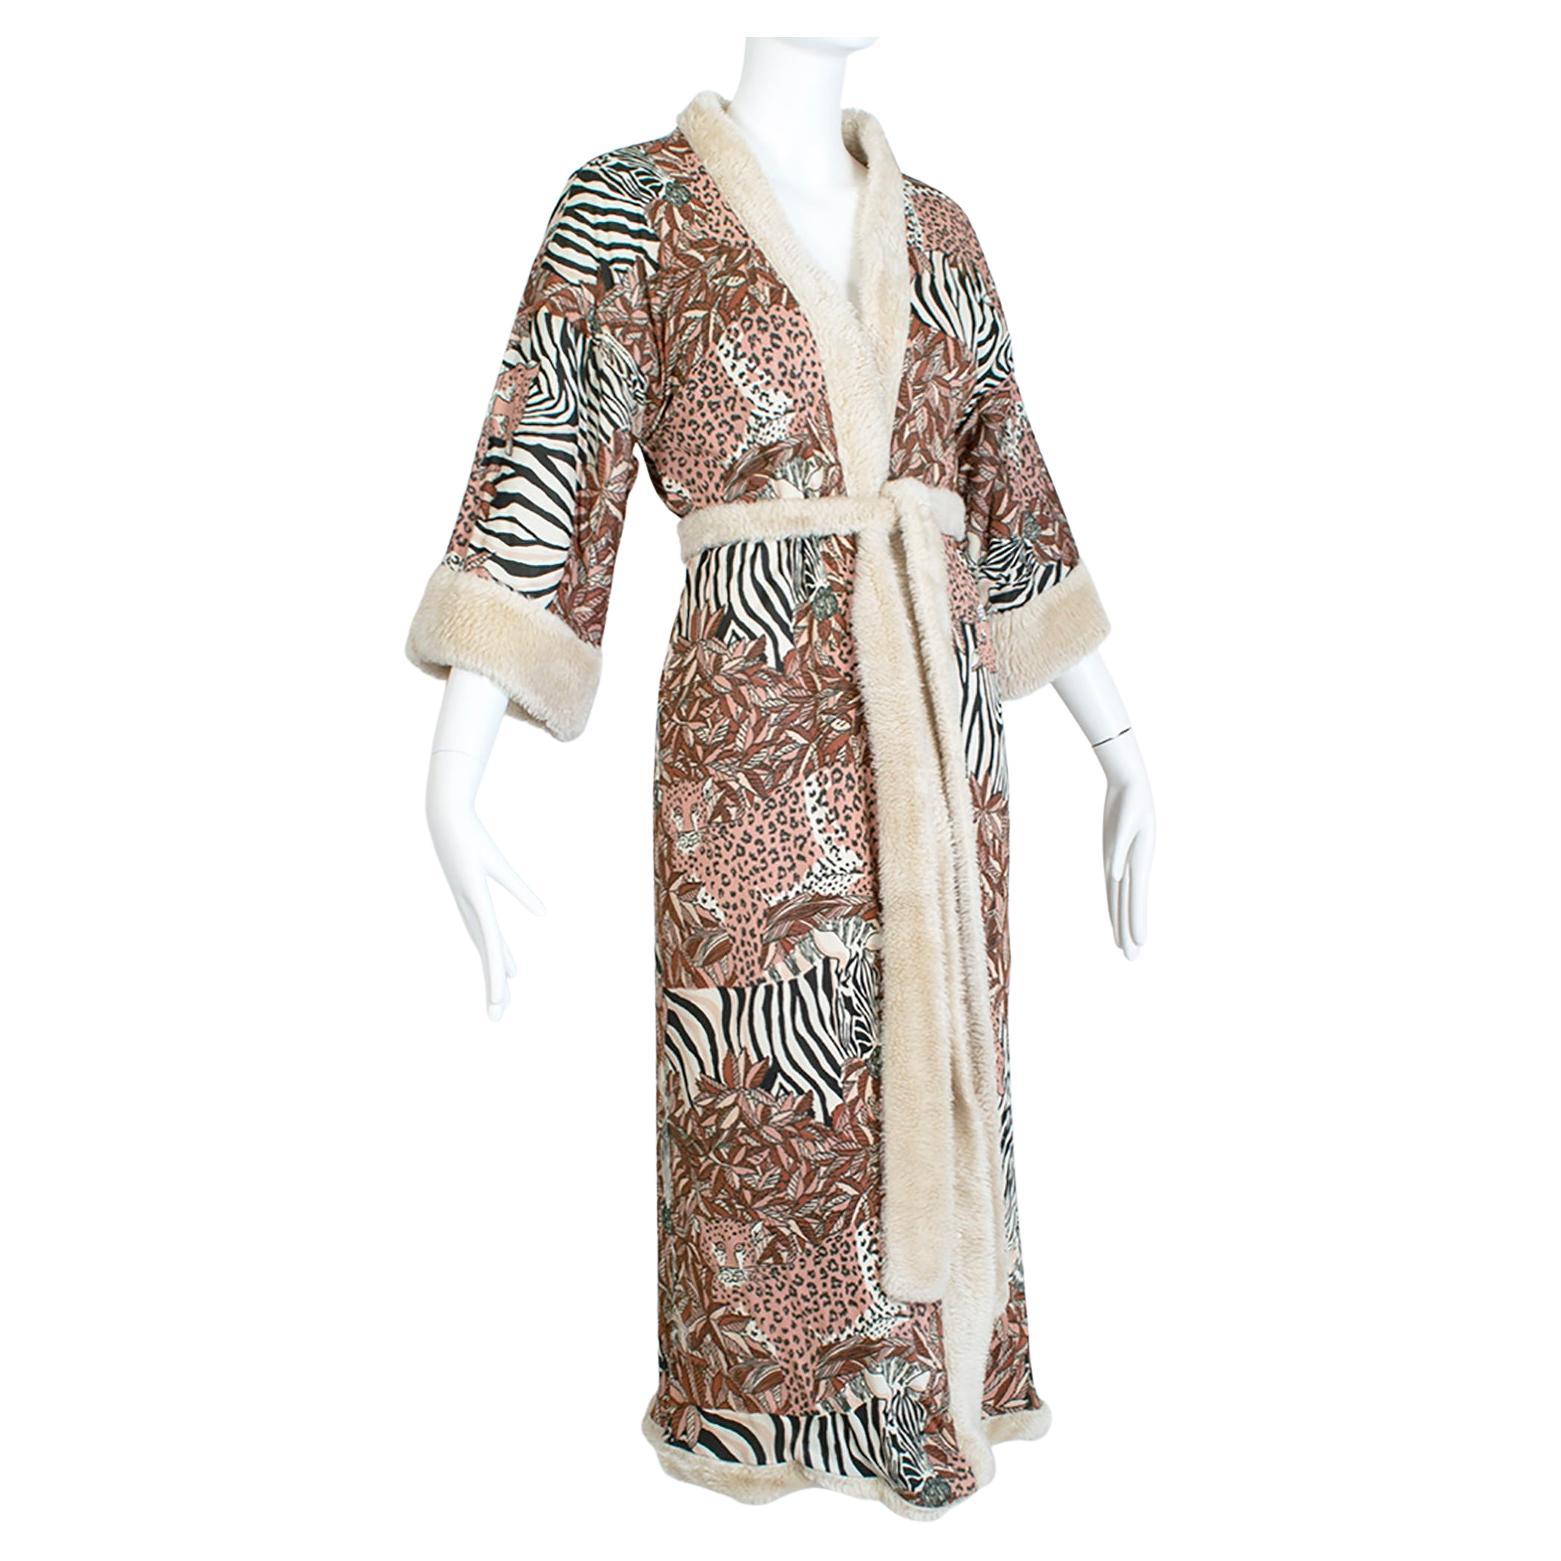 Reversible Ivory Faux Fur Robe w Leonard Paris-Inspired Jungle Lining - M, 1960s For Sale